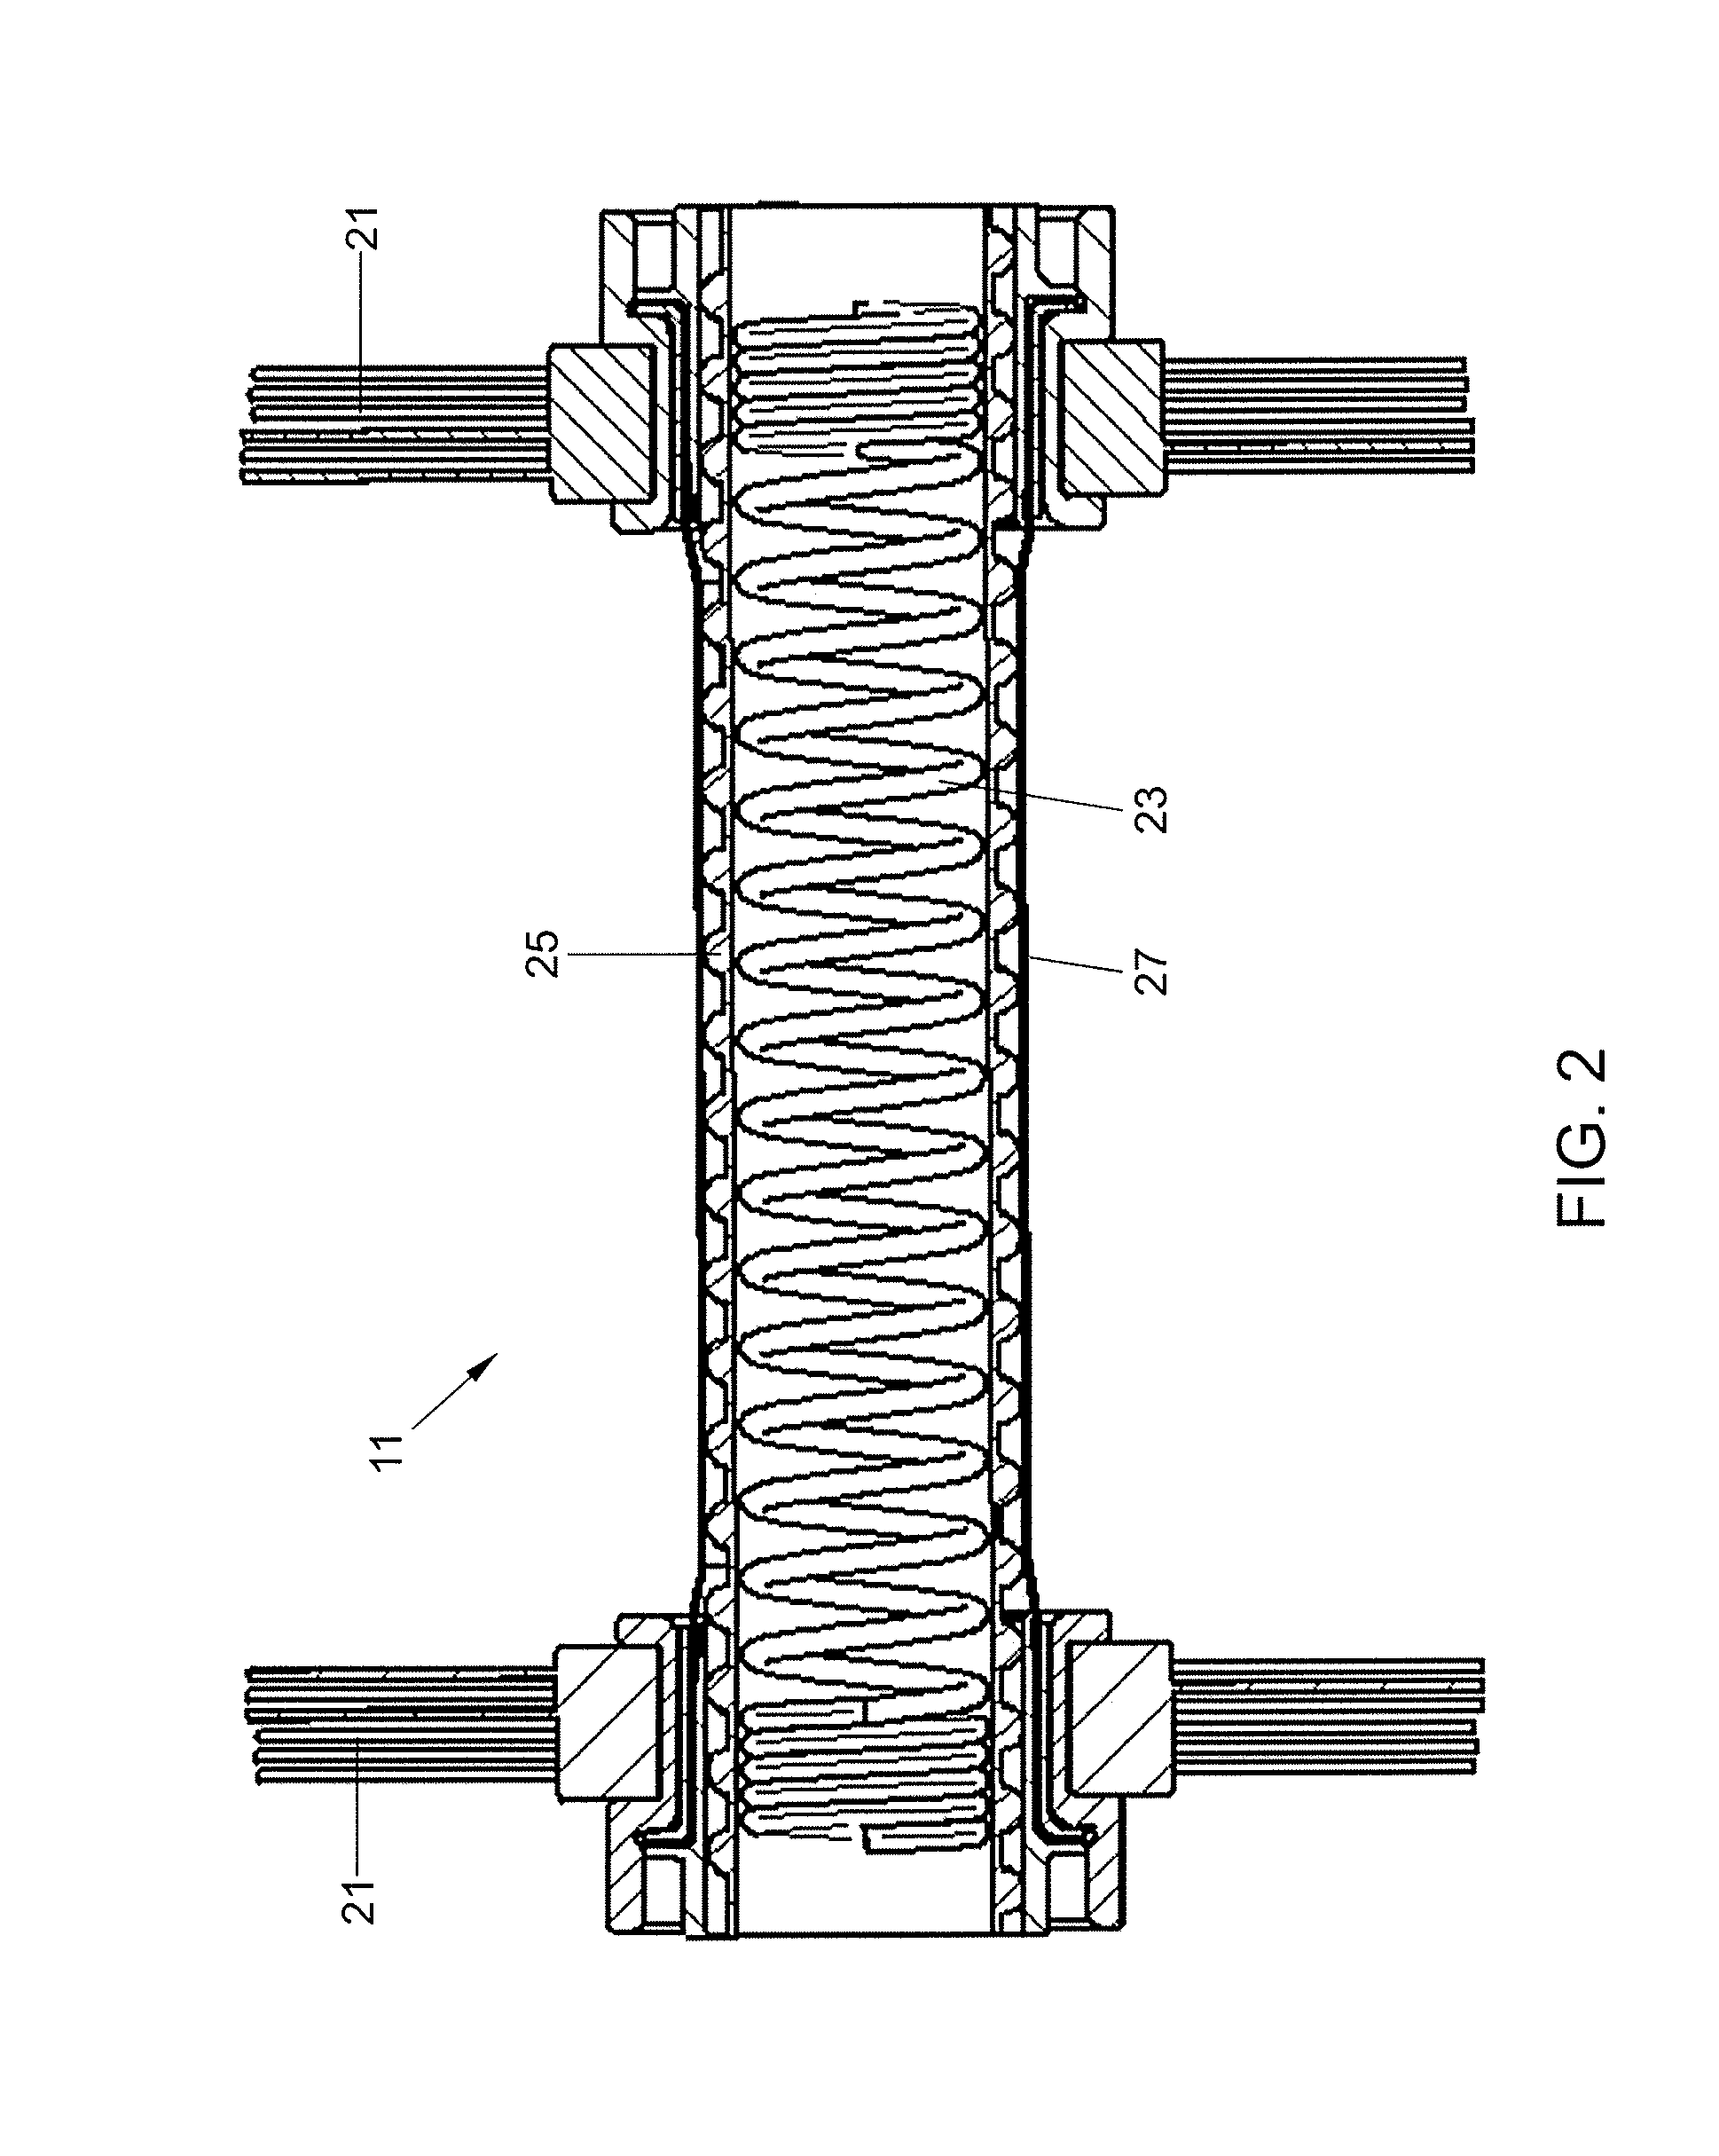 Tool, method, and system for in-line inspection or treatment of a pipeline